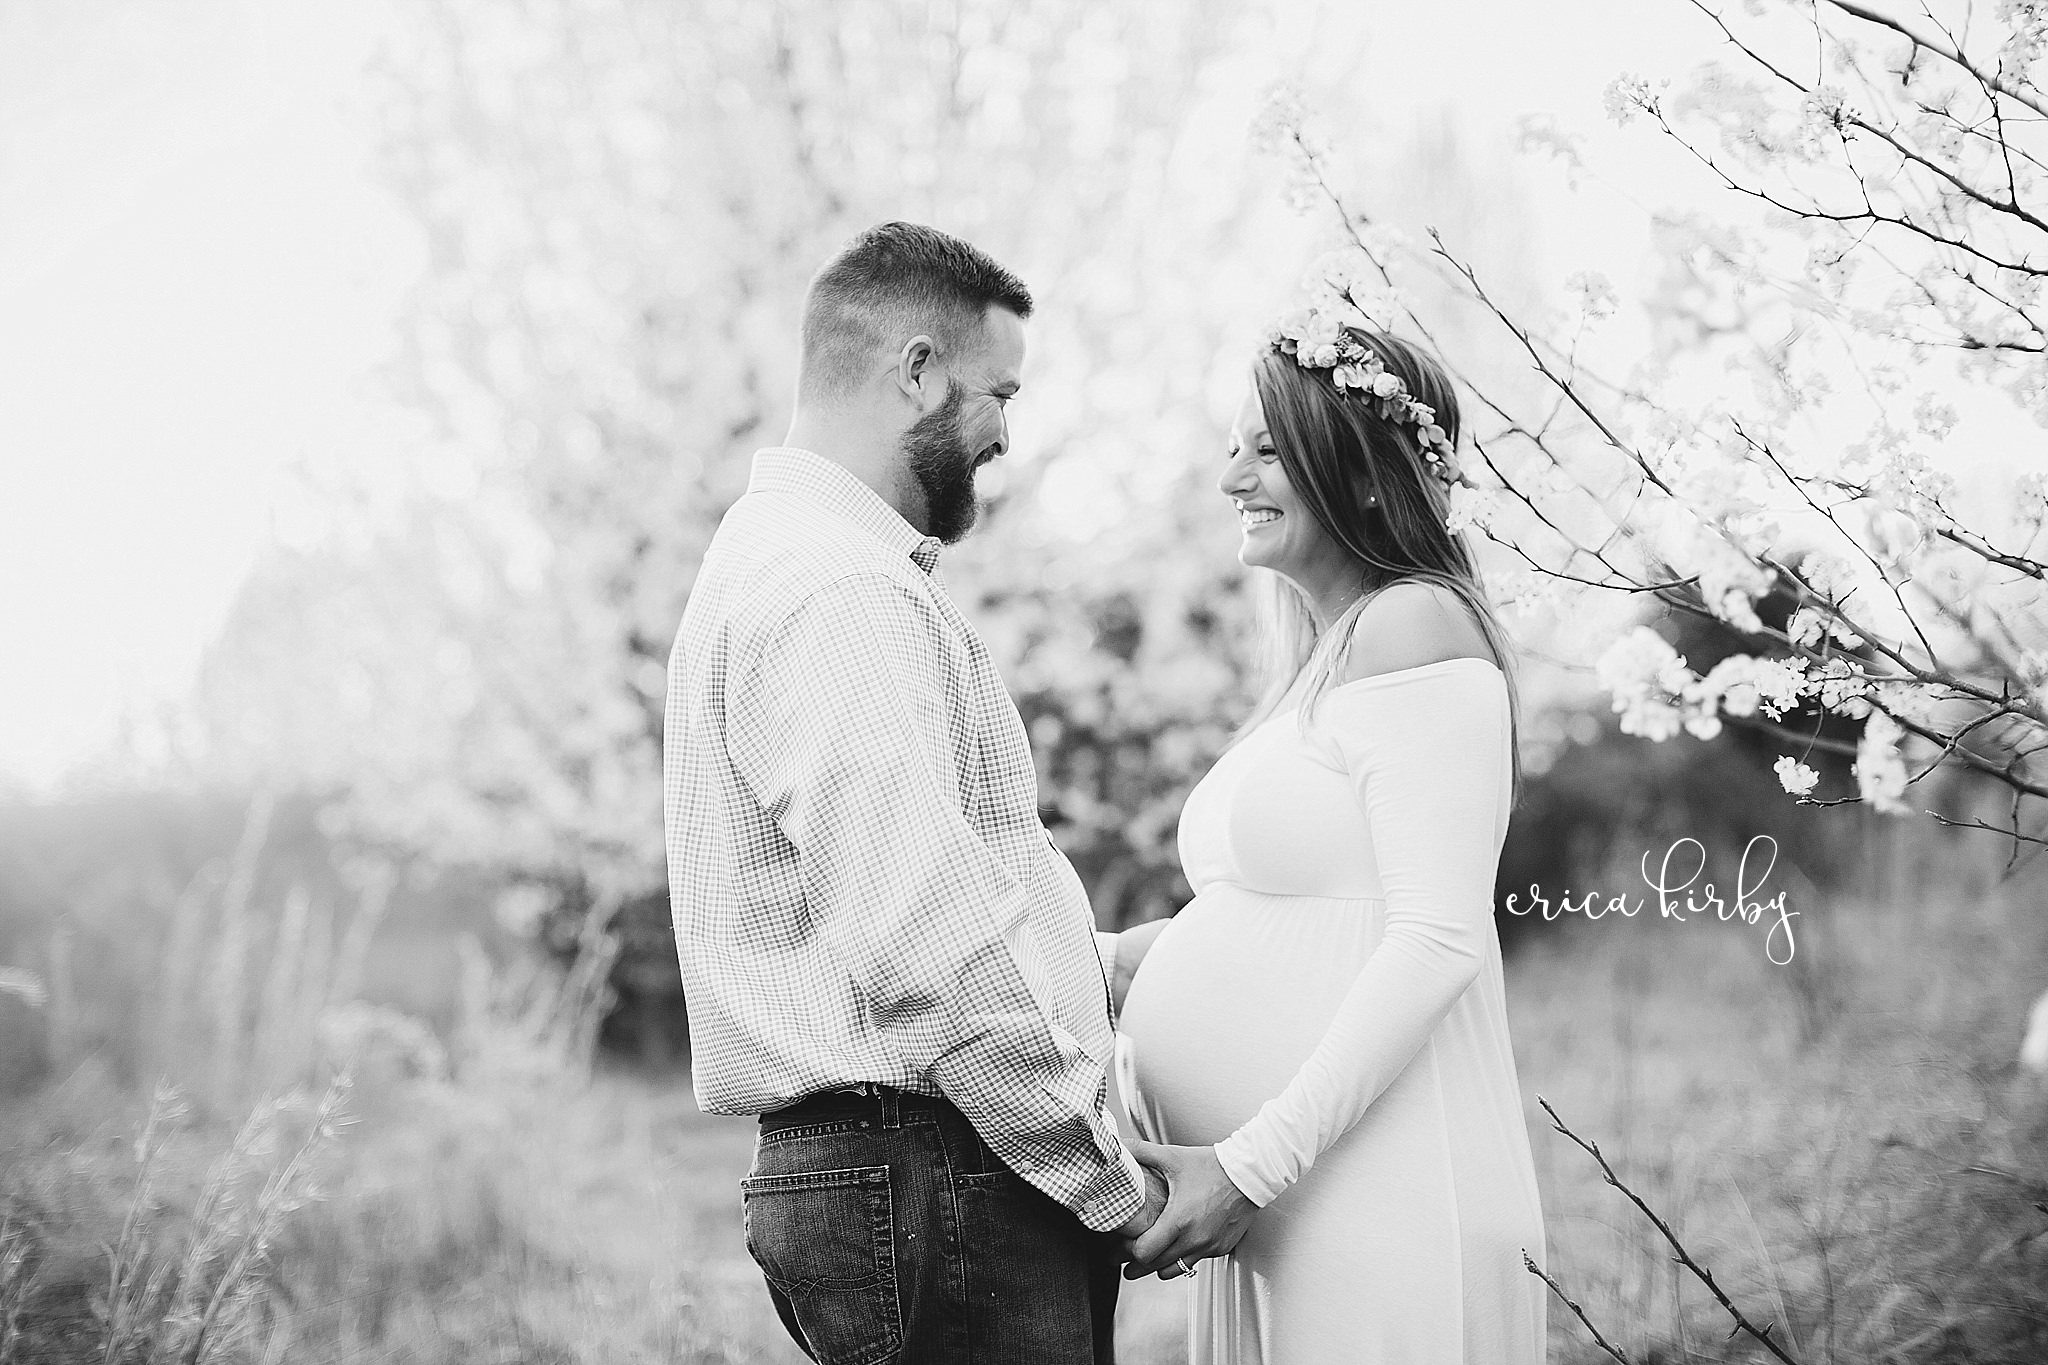 Northwest Arkansas Maternity Portrait Photographer - Erica Kirby Photography pregnancy photos in white blossoms in spring bentonville rogers fayetteville